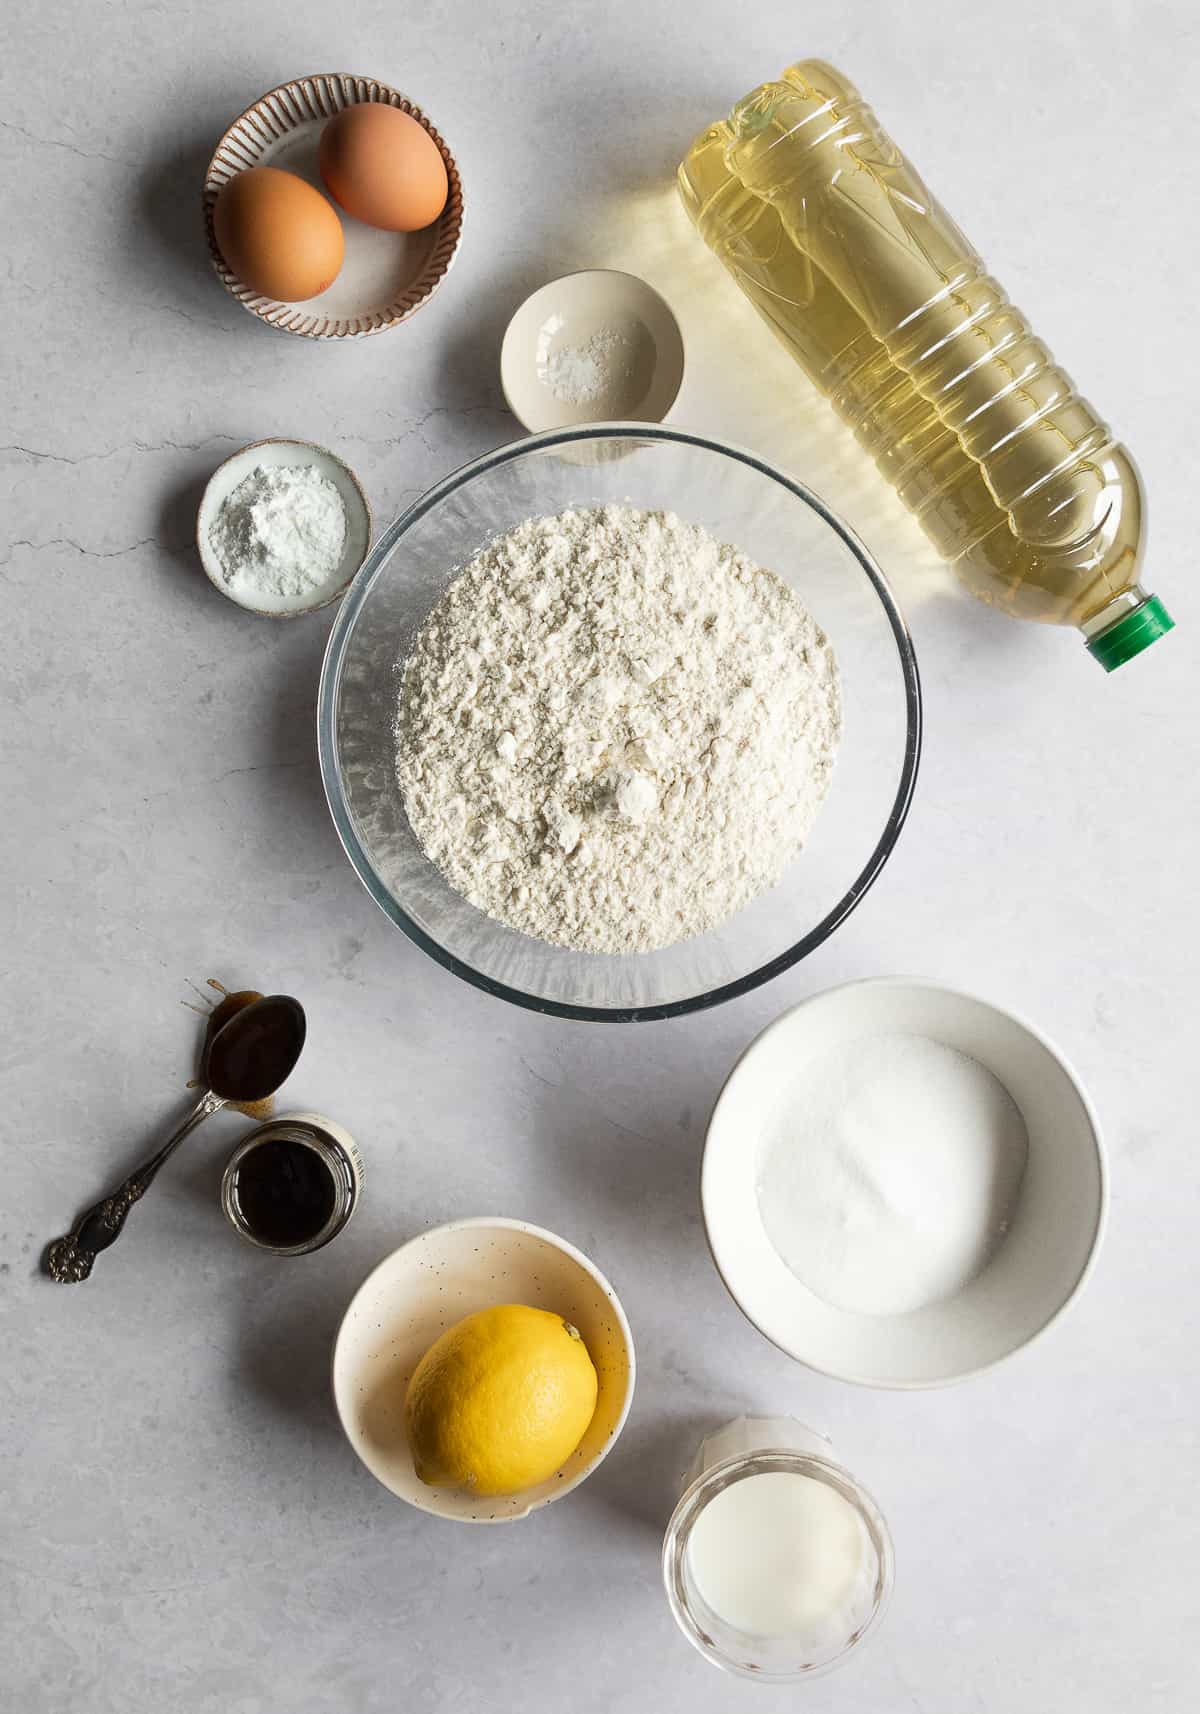 Ingredients on a table